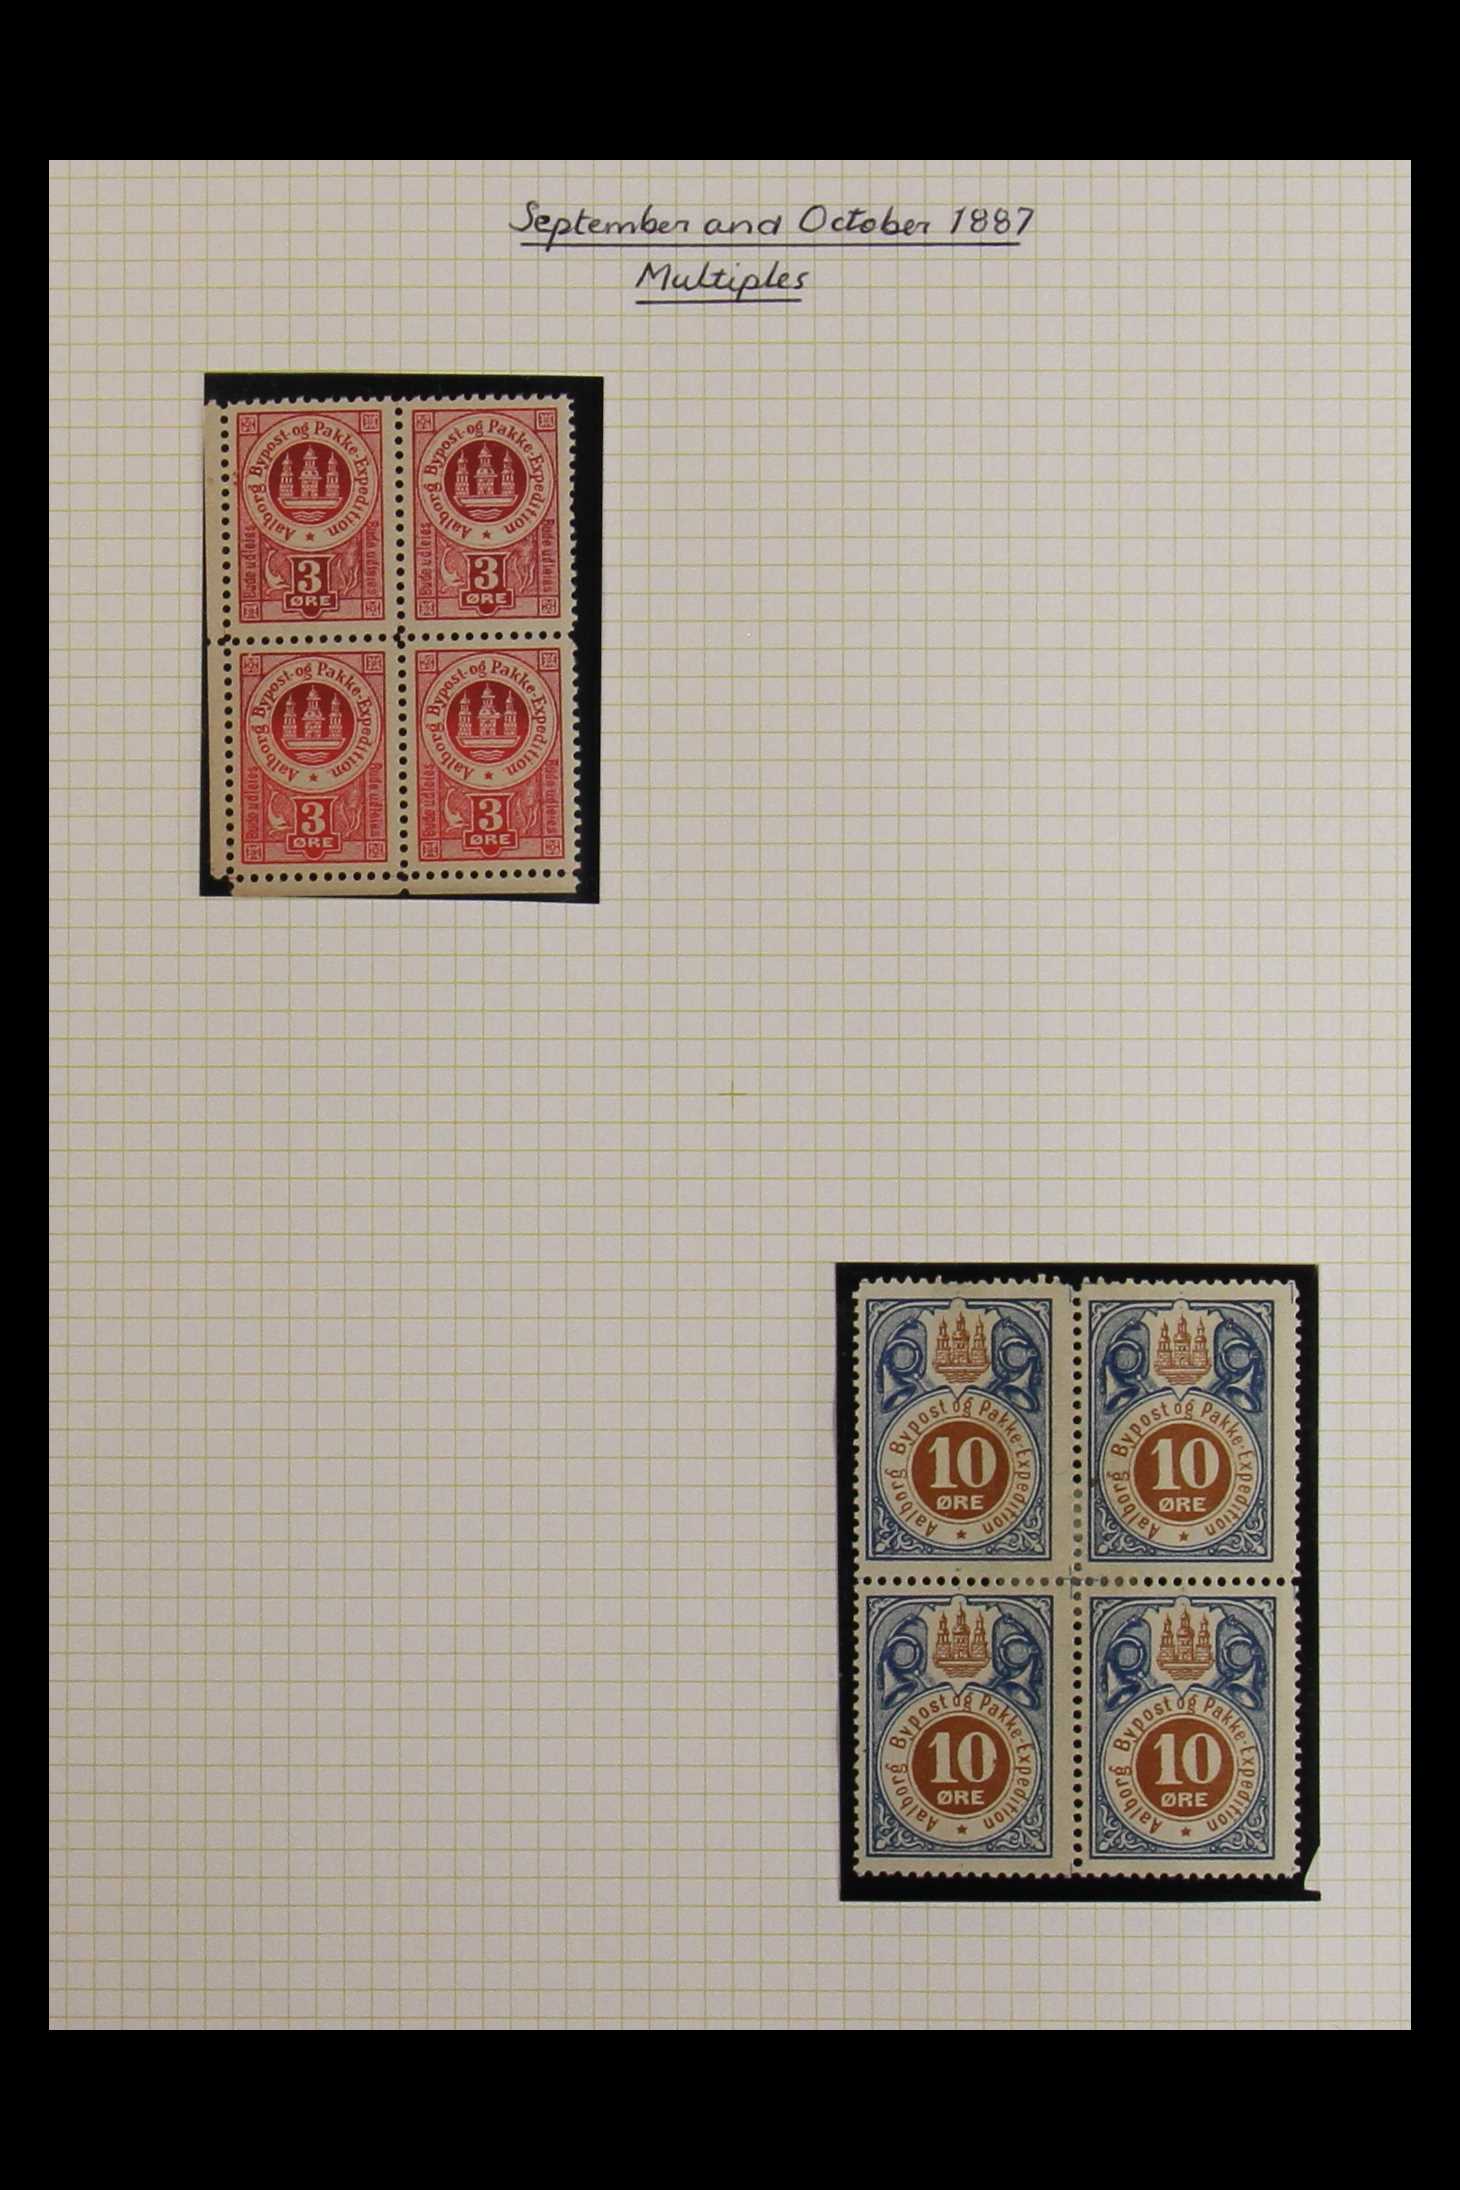 DENMARK LOCAL STAMPS 1885-87 AALBORG BYPOST mint & used stamps, various surcharges, pairs, blocks of - Image 7 of 17